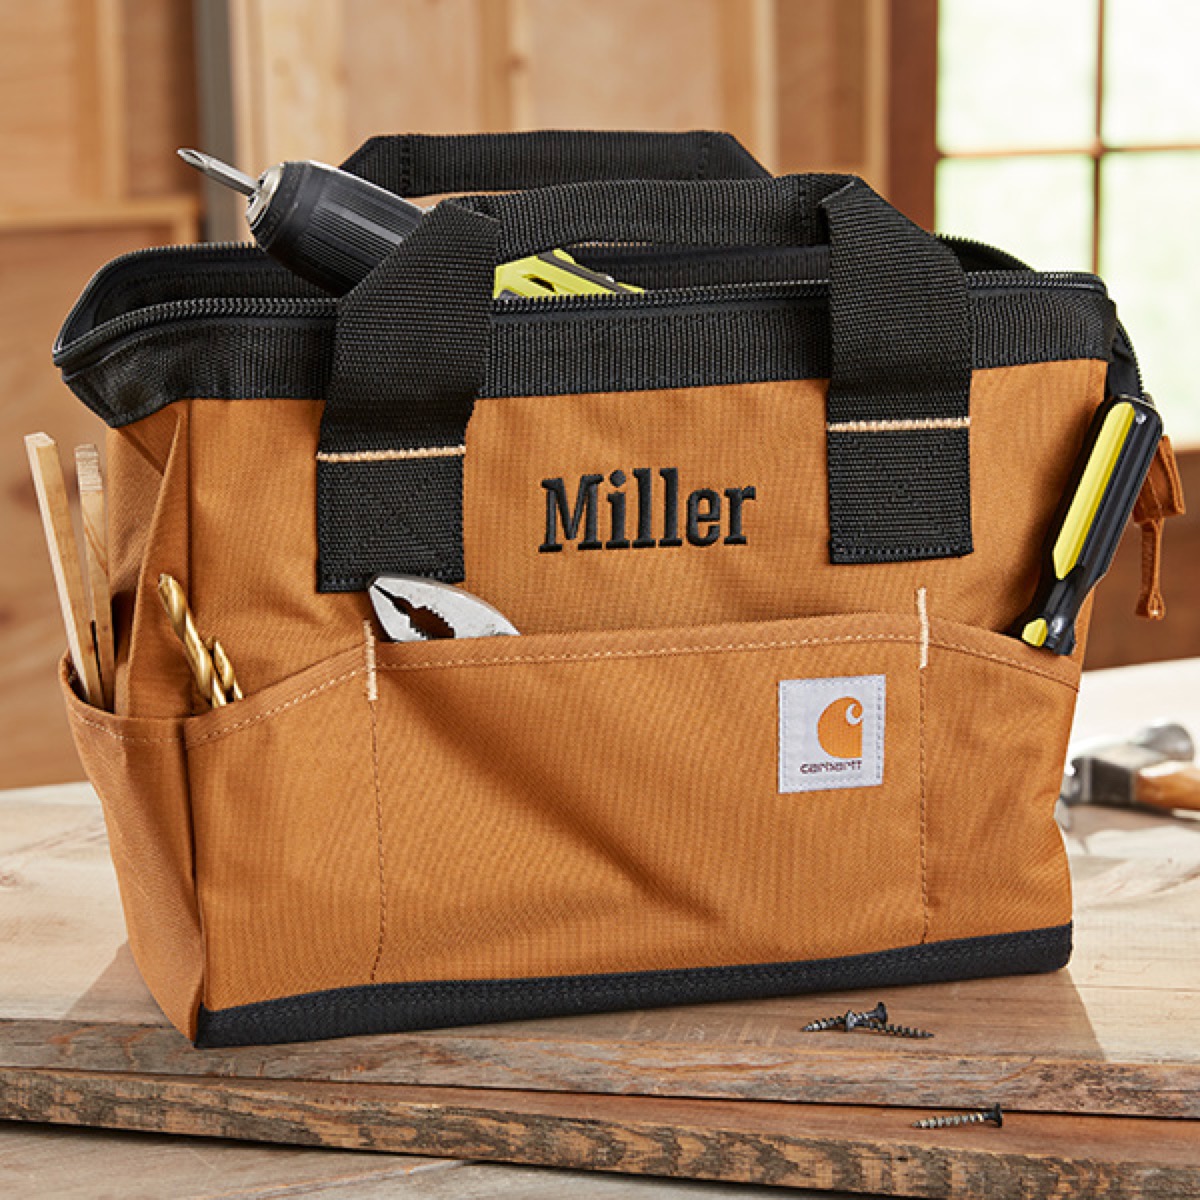 tool bag with "Miller" embroidered